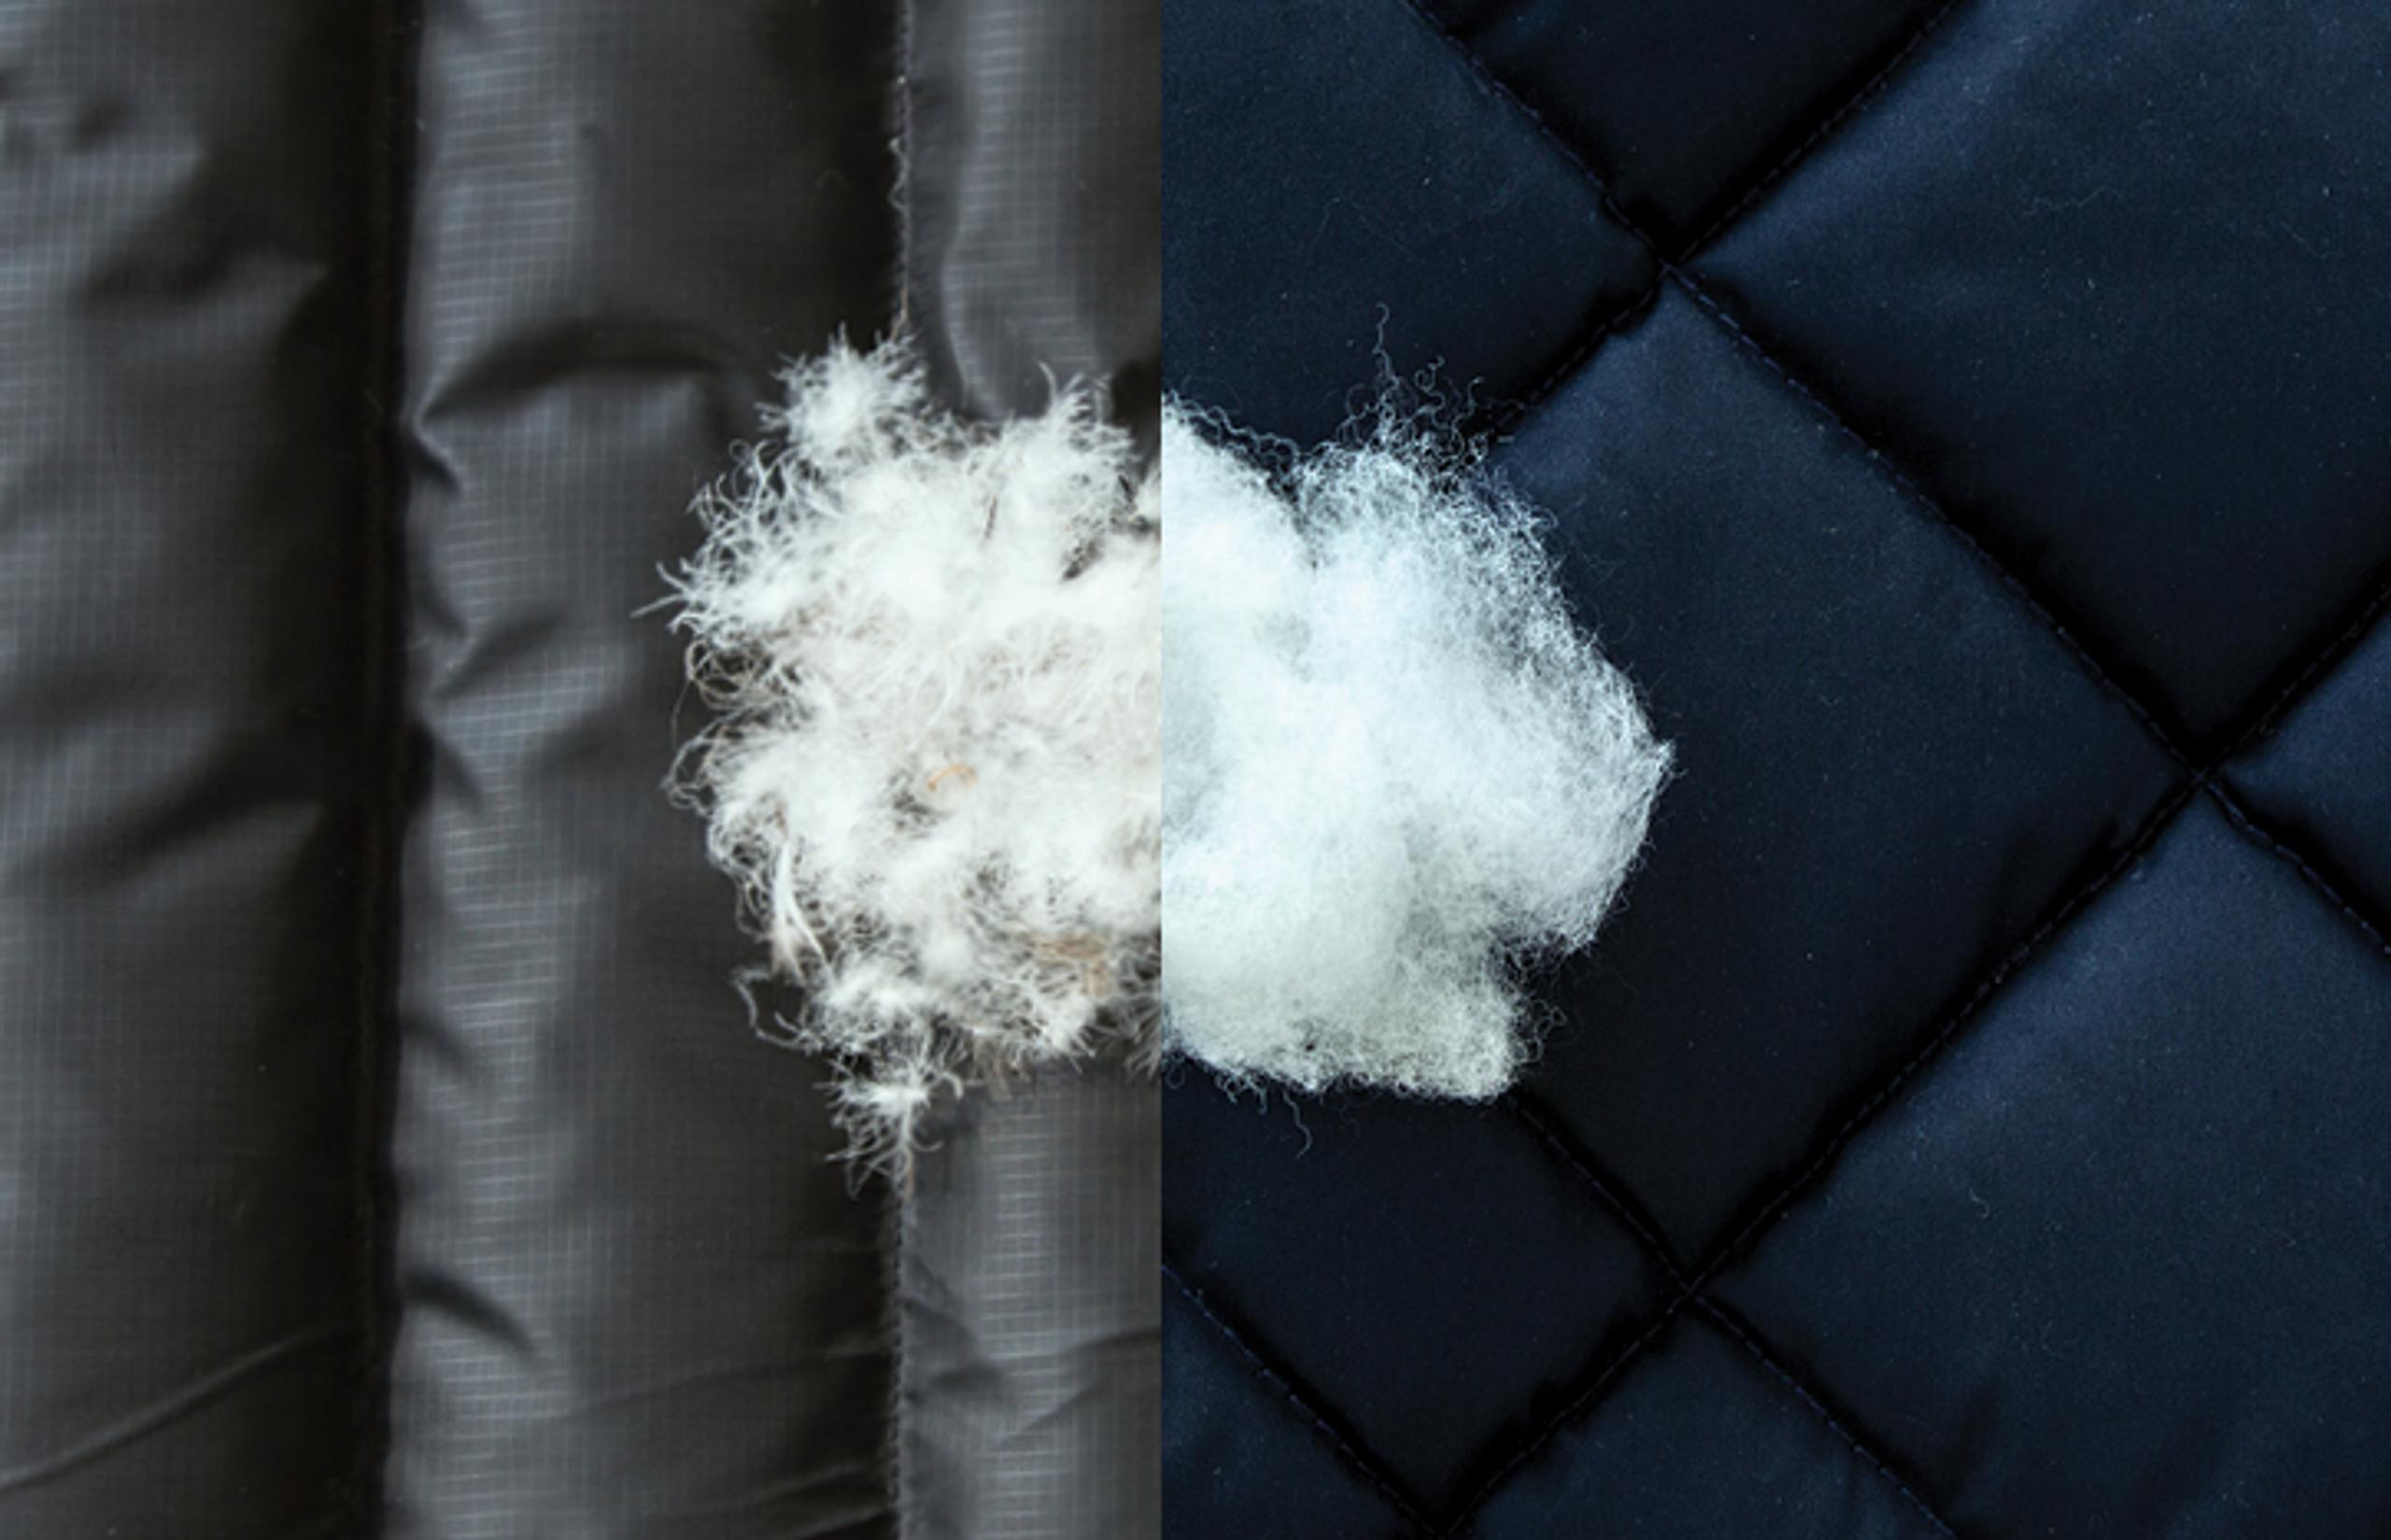 side-by-side comparison of down and synthetic fabric